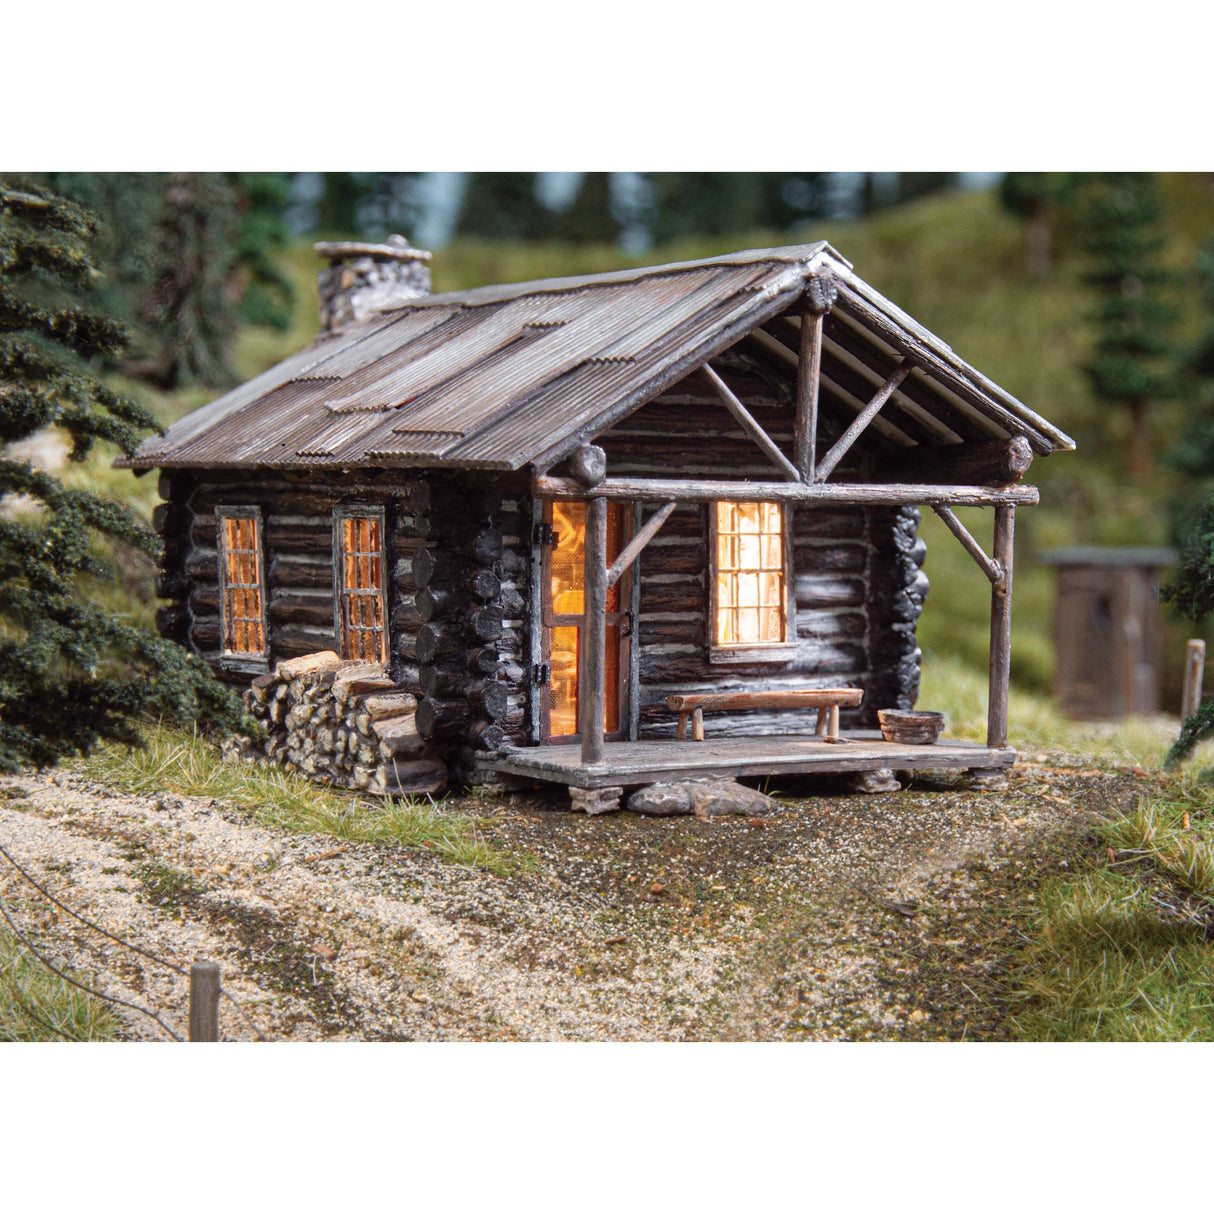 Woodland Scenics HO Scale Cozy Cabin Built and Ready